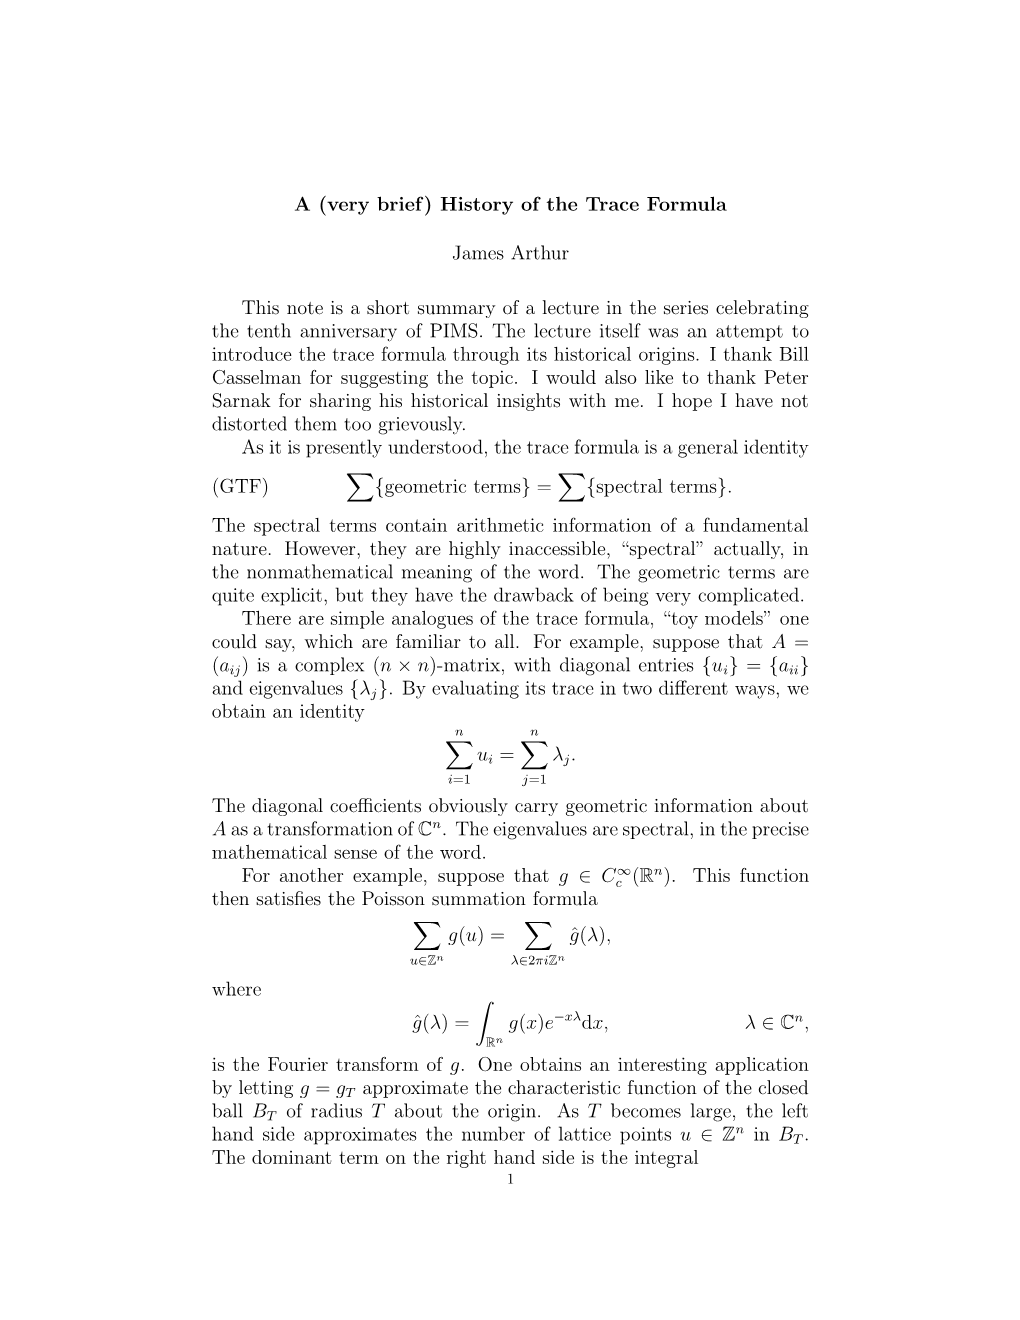 A (Very Brief) History of the Trace Formula James Arthur This Note Is a Short Summary of a Lecture in the Series Celebrating